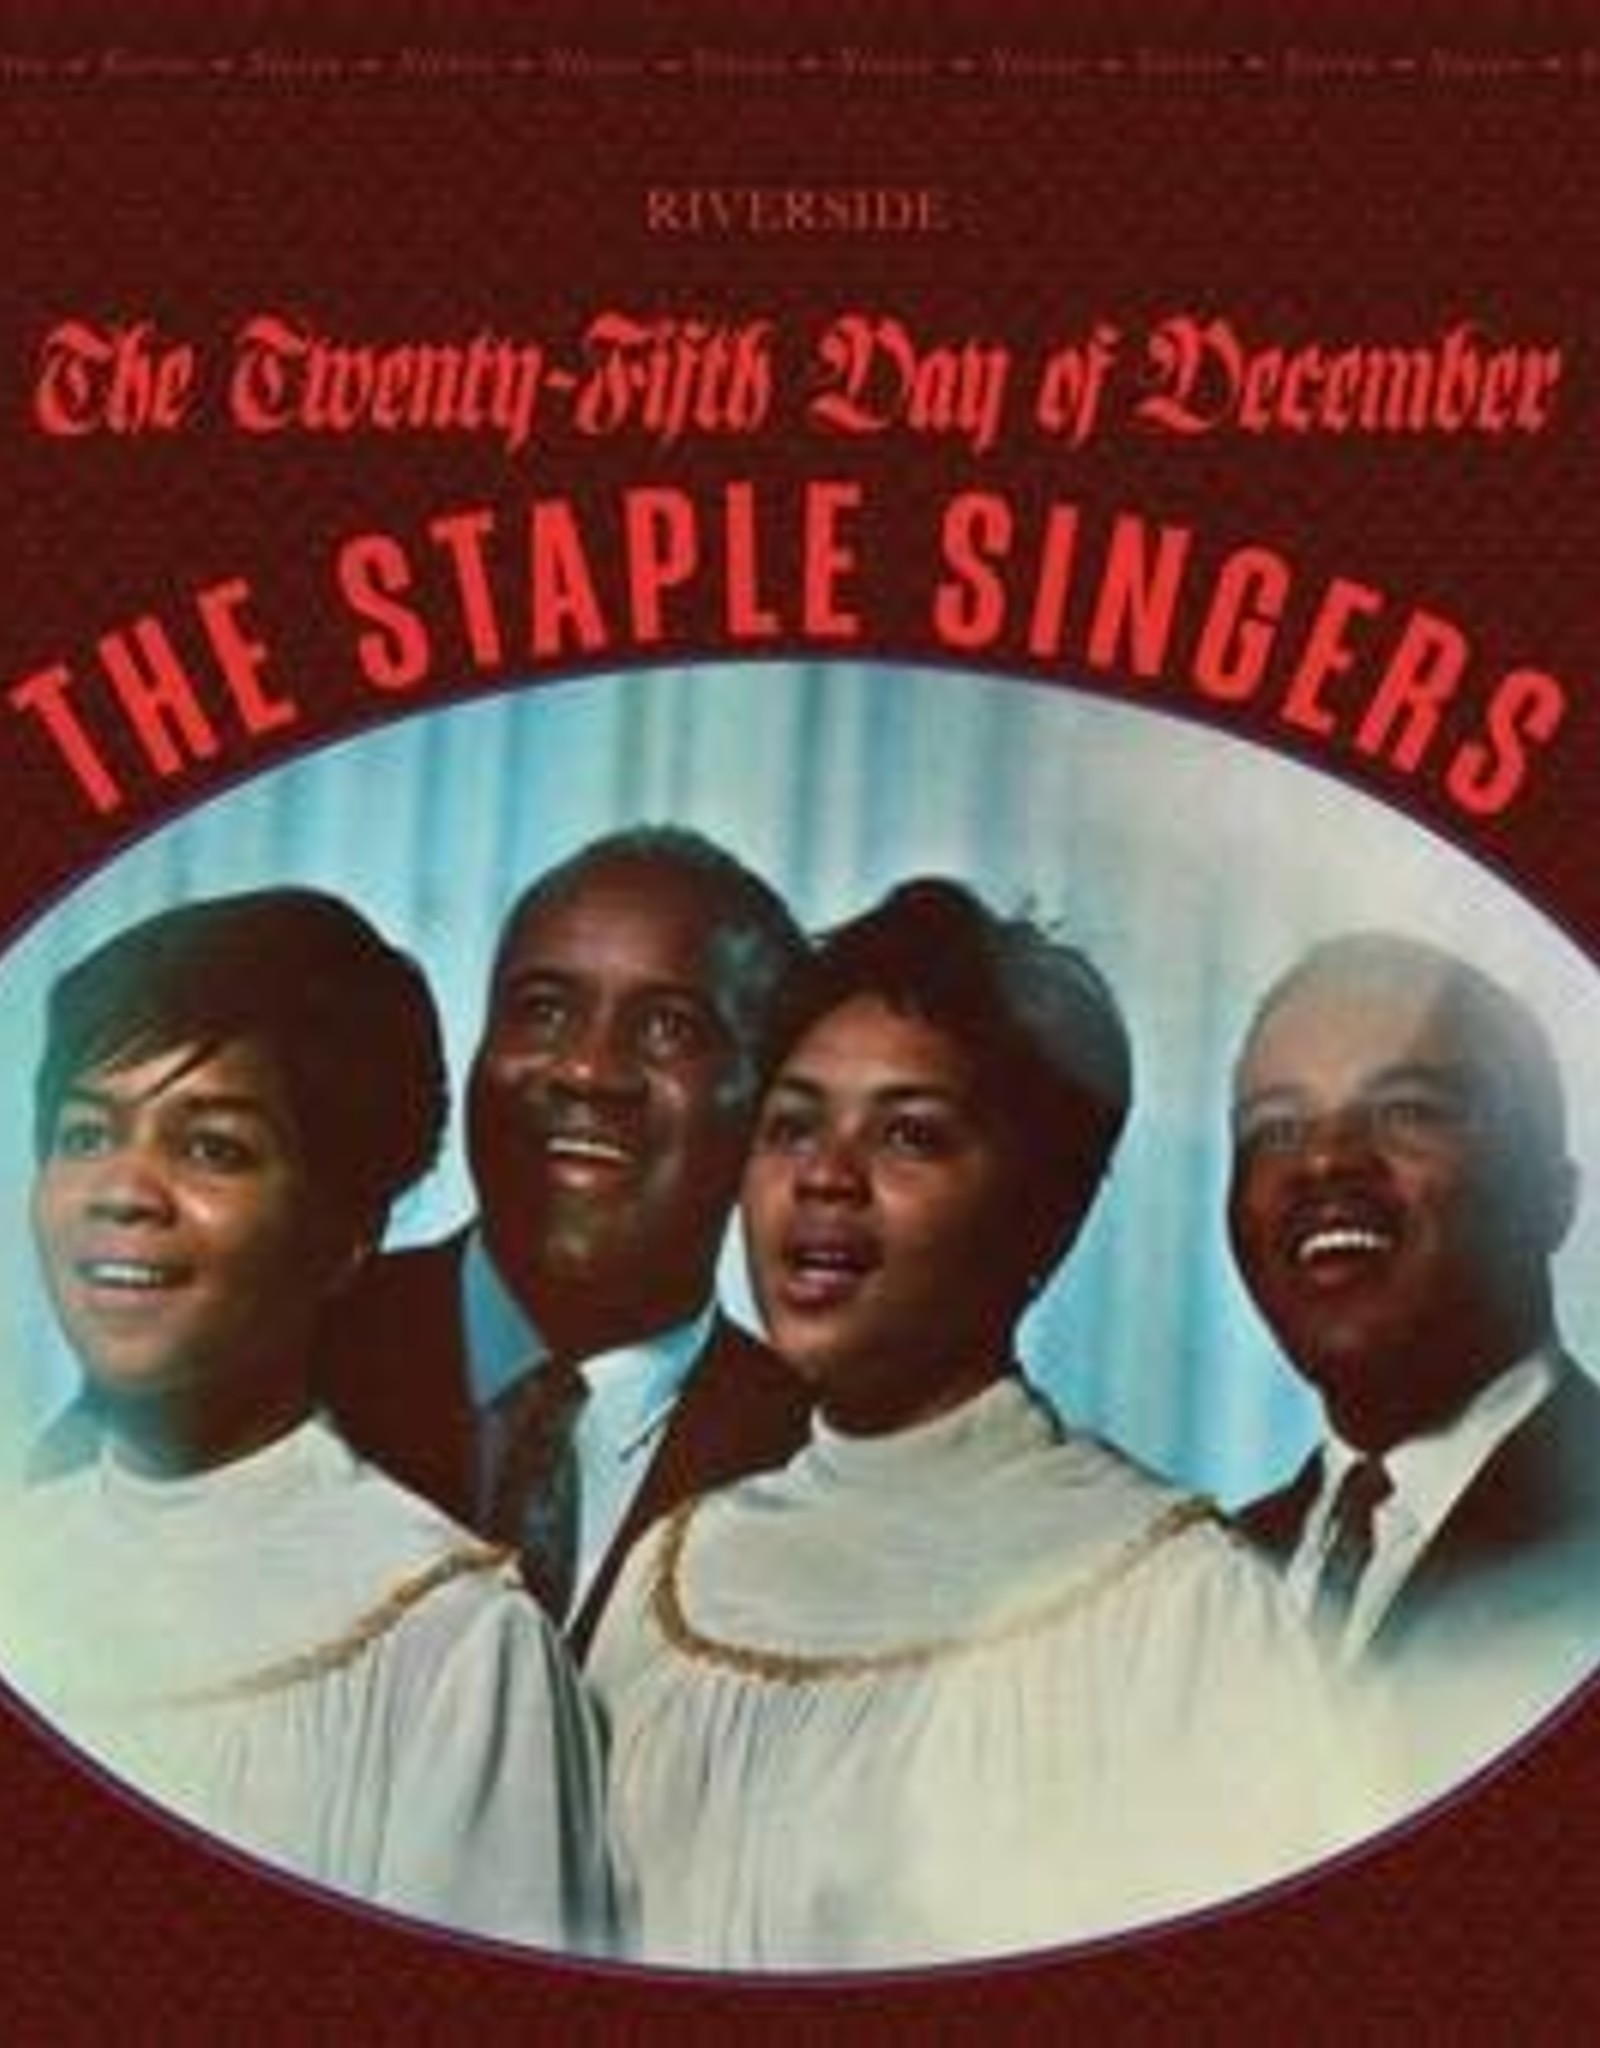 The Staples Singers - The 25th of December (RSDBF 2021)